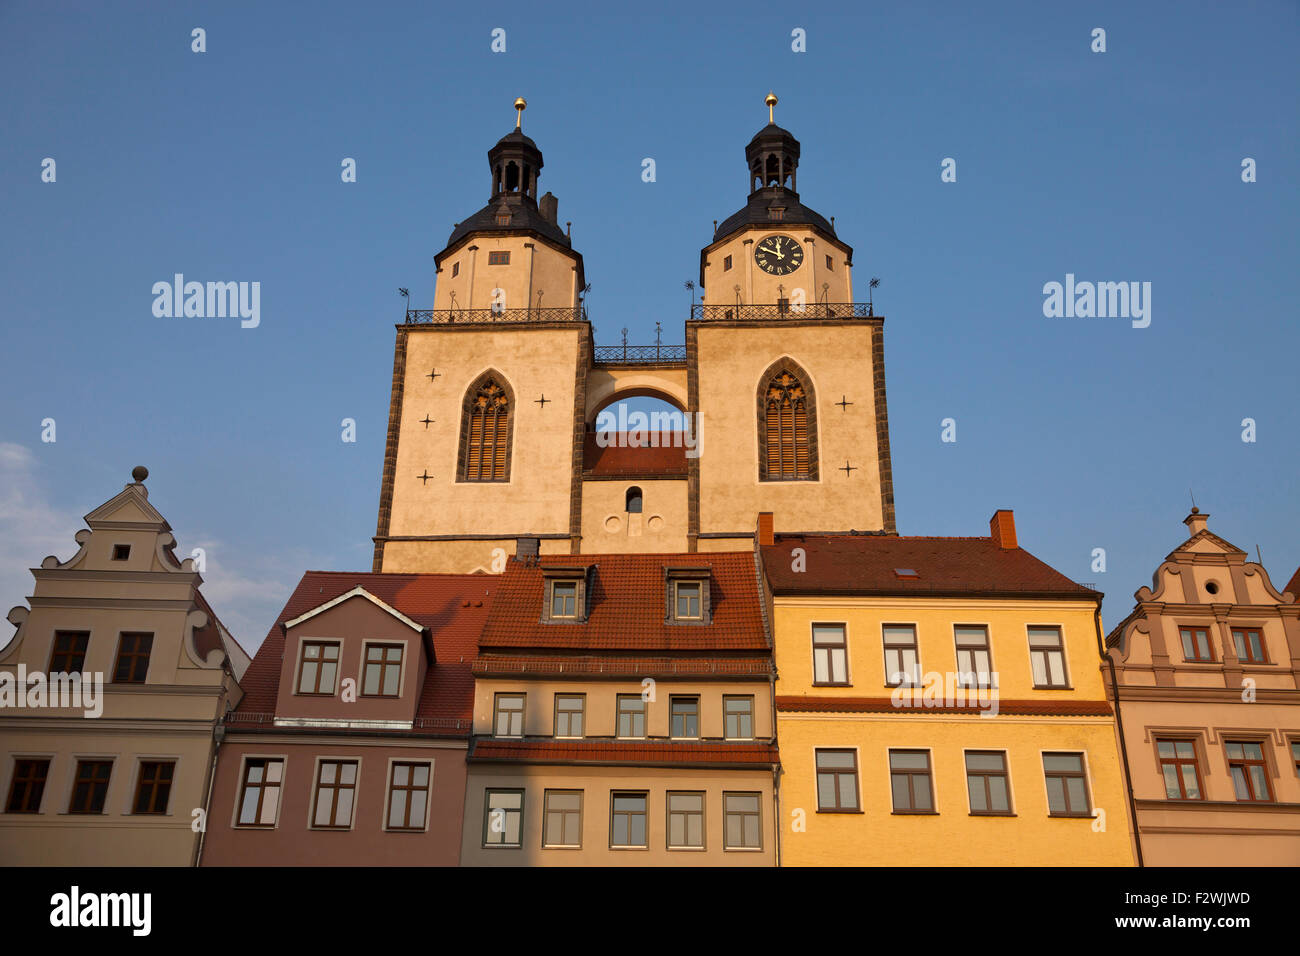 Market square with Stadtkirche St. Marien , Lutherstadt Wittenberg, Saxony-Anhalt, Germany Stock Photo